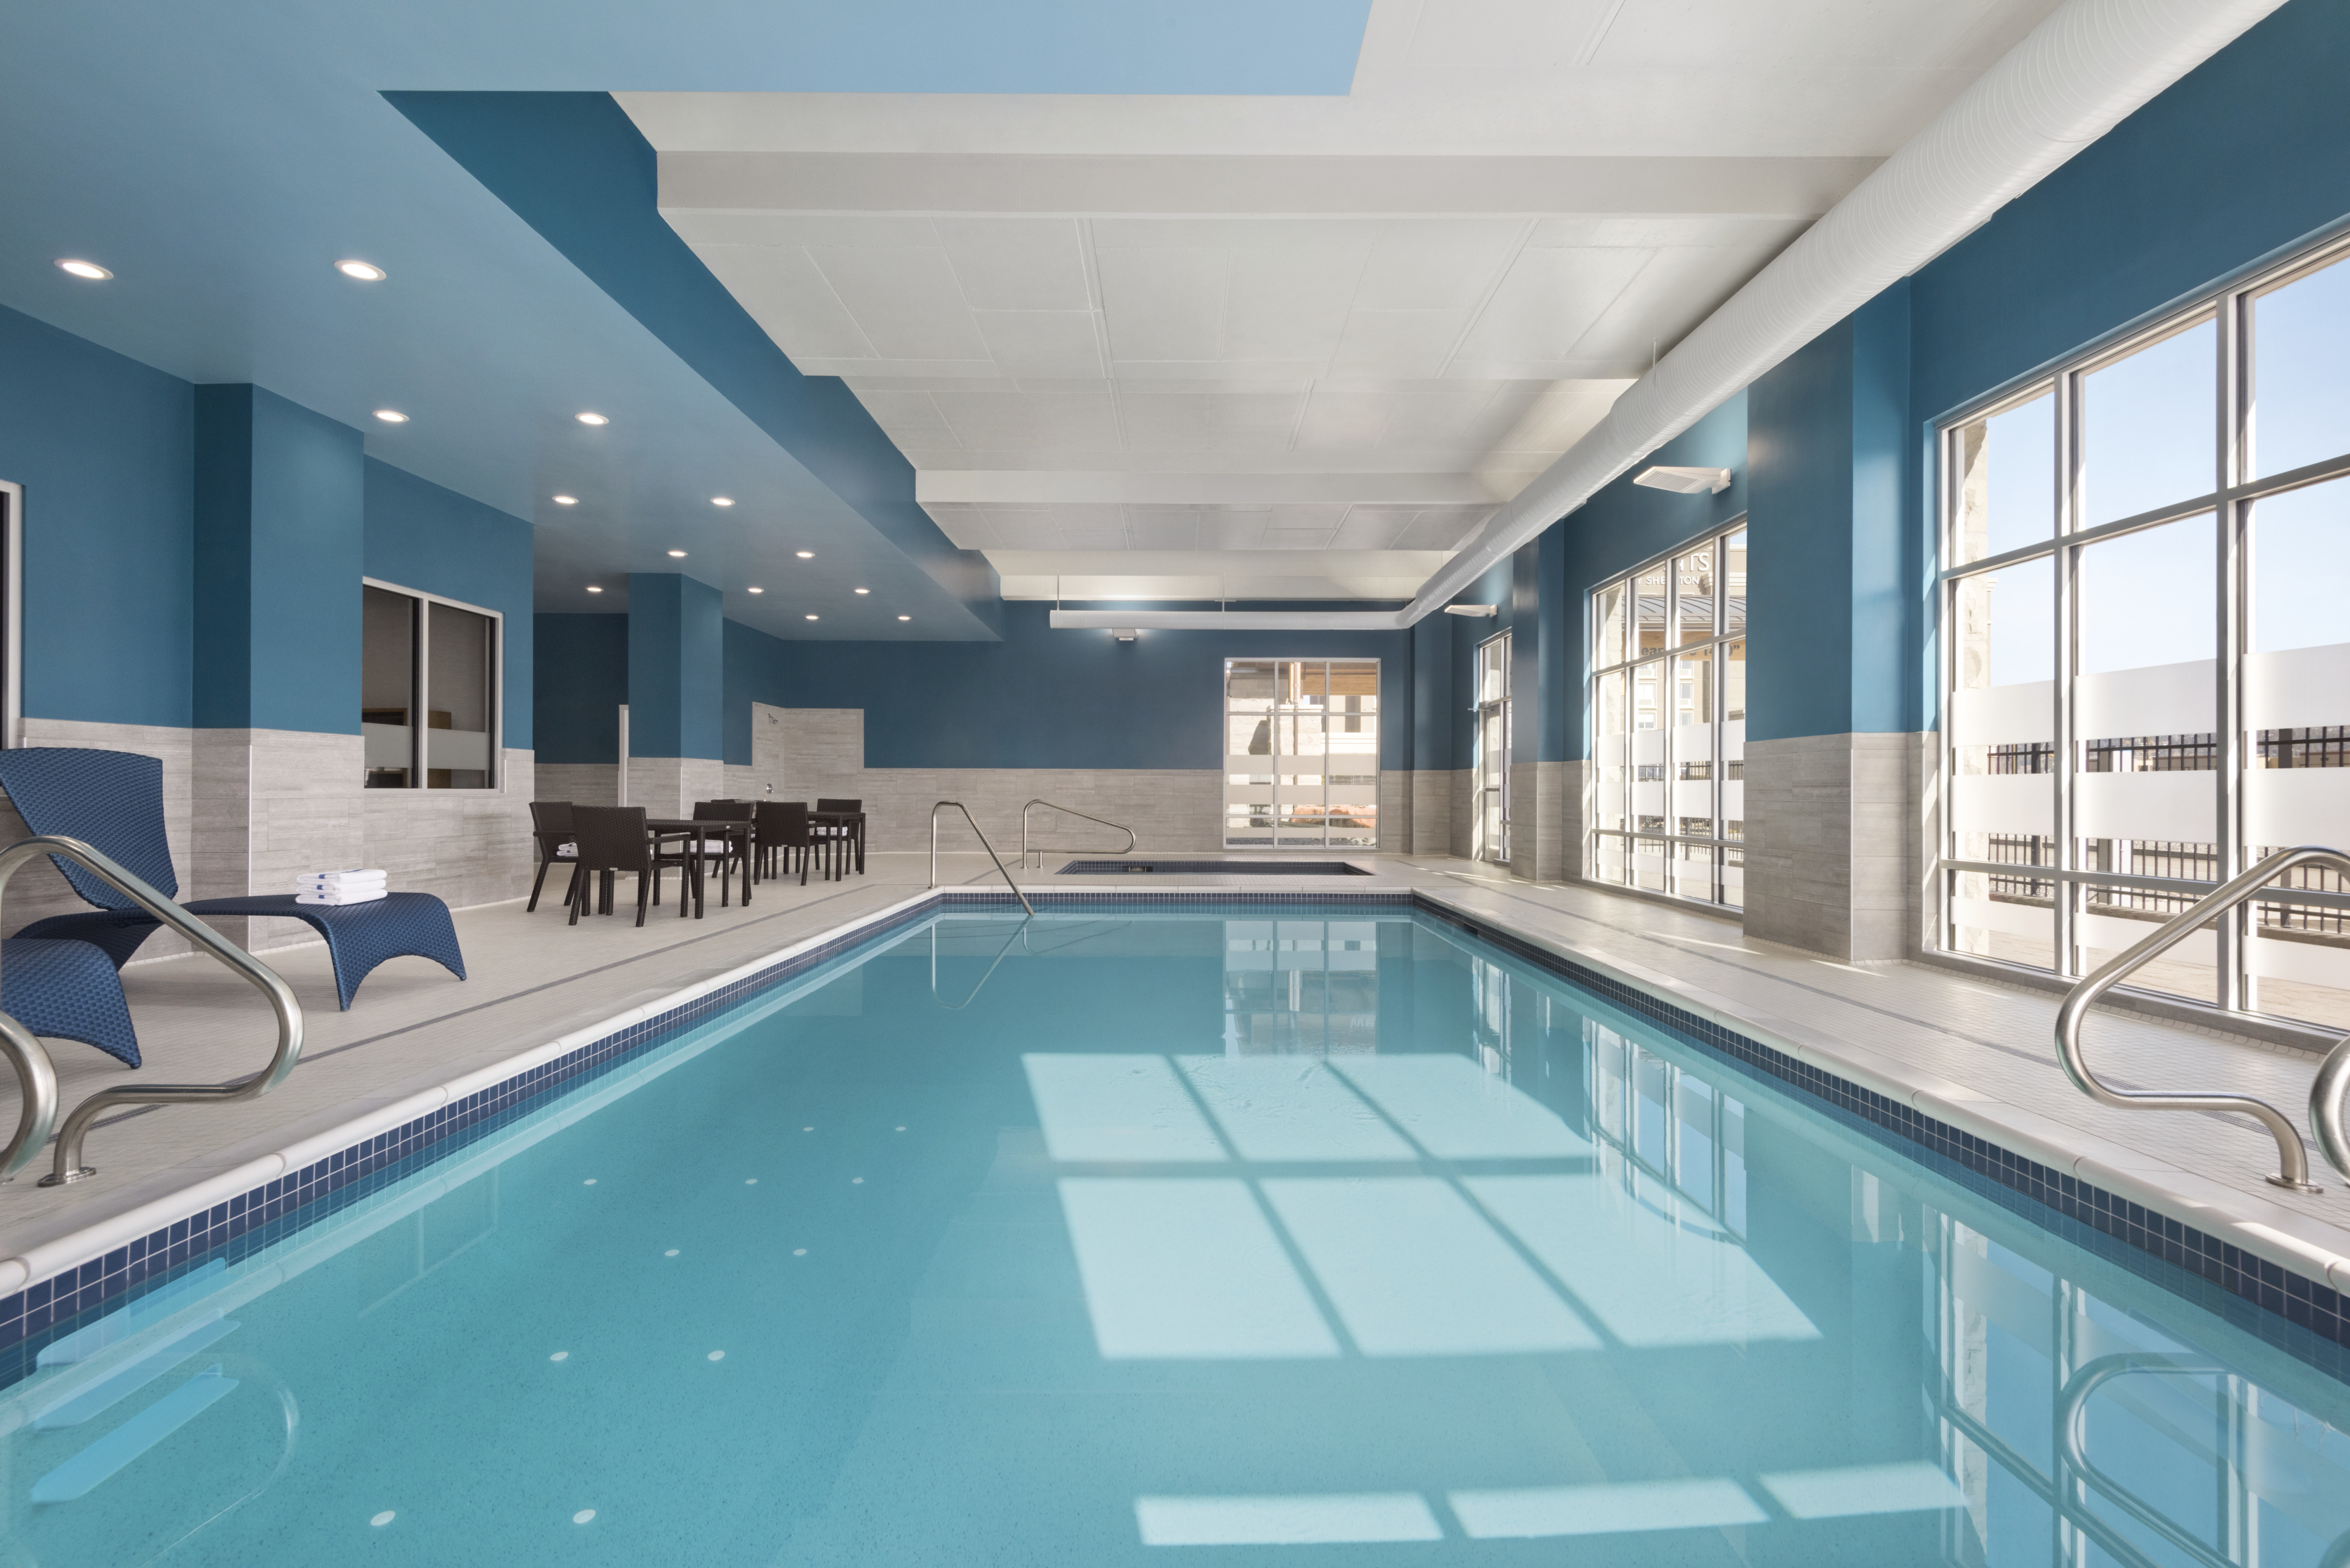 Indoor pool with loungers